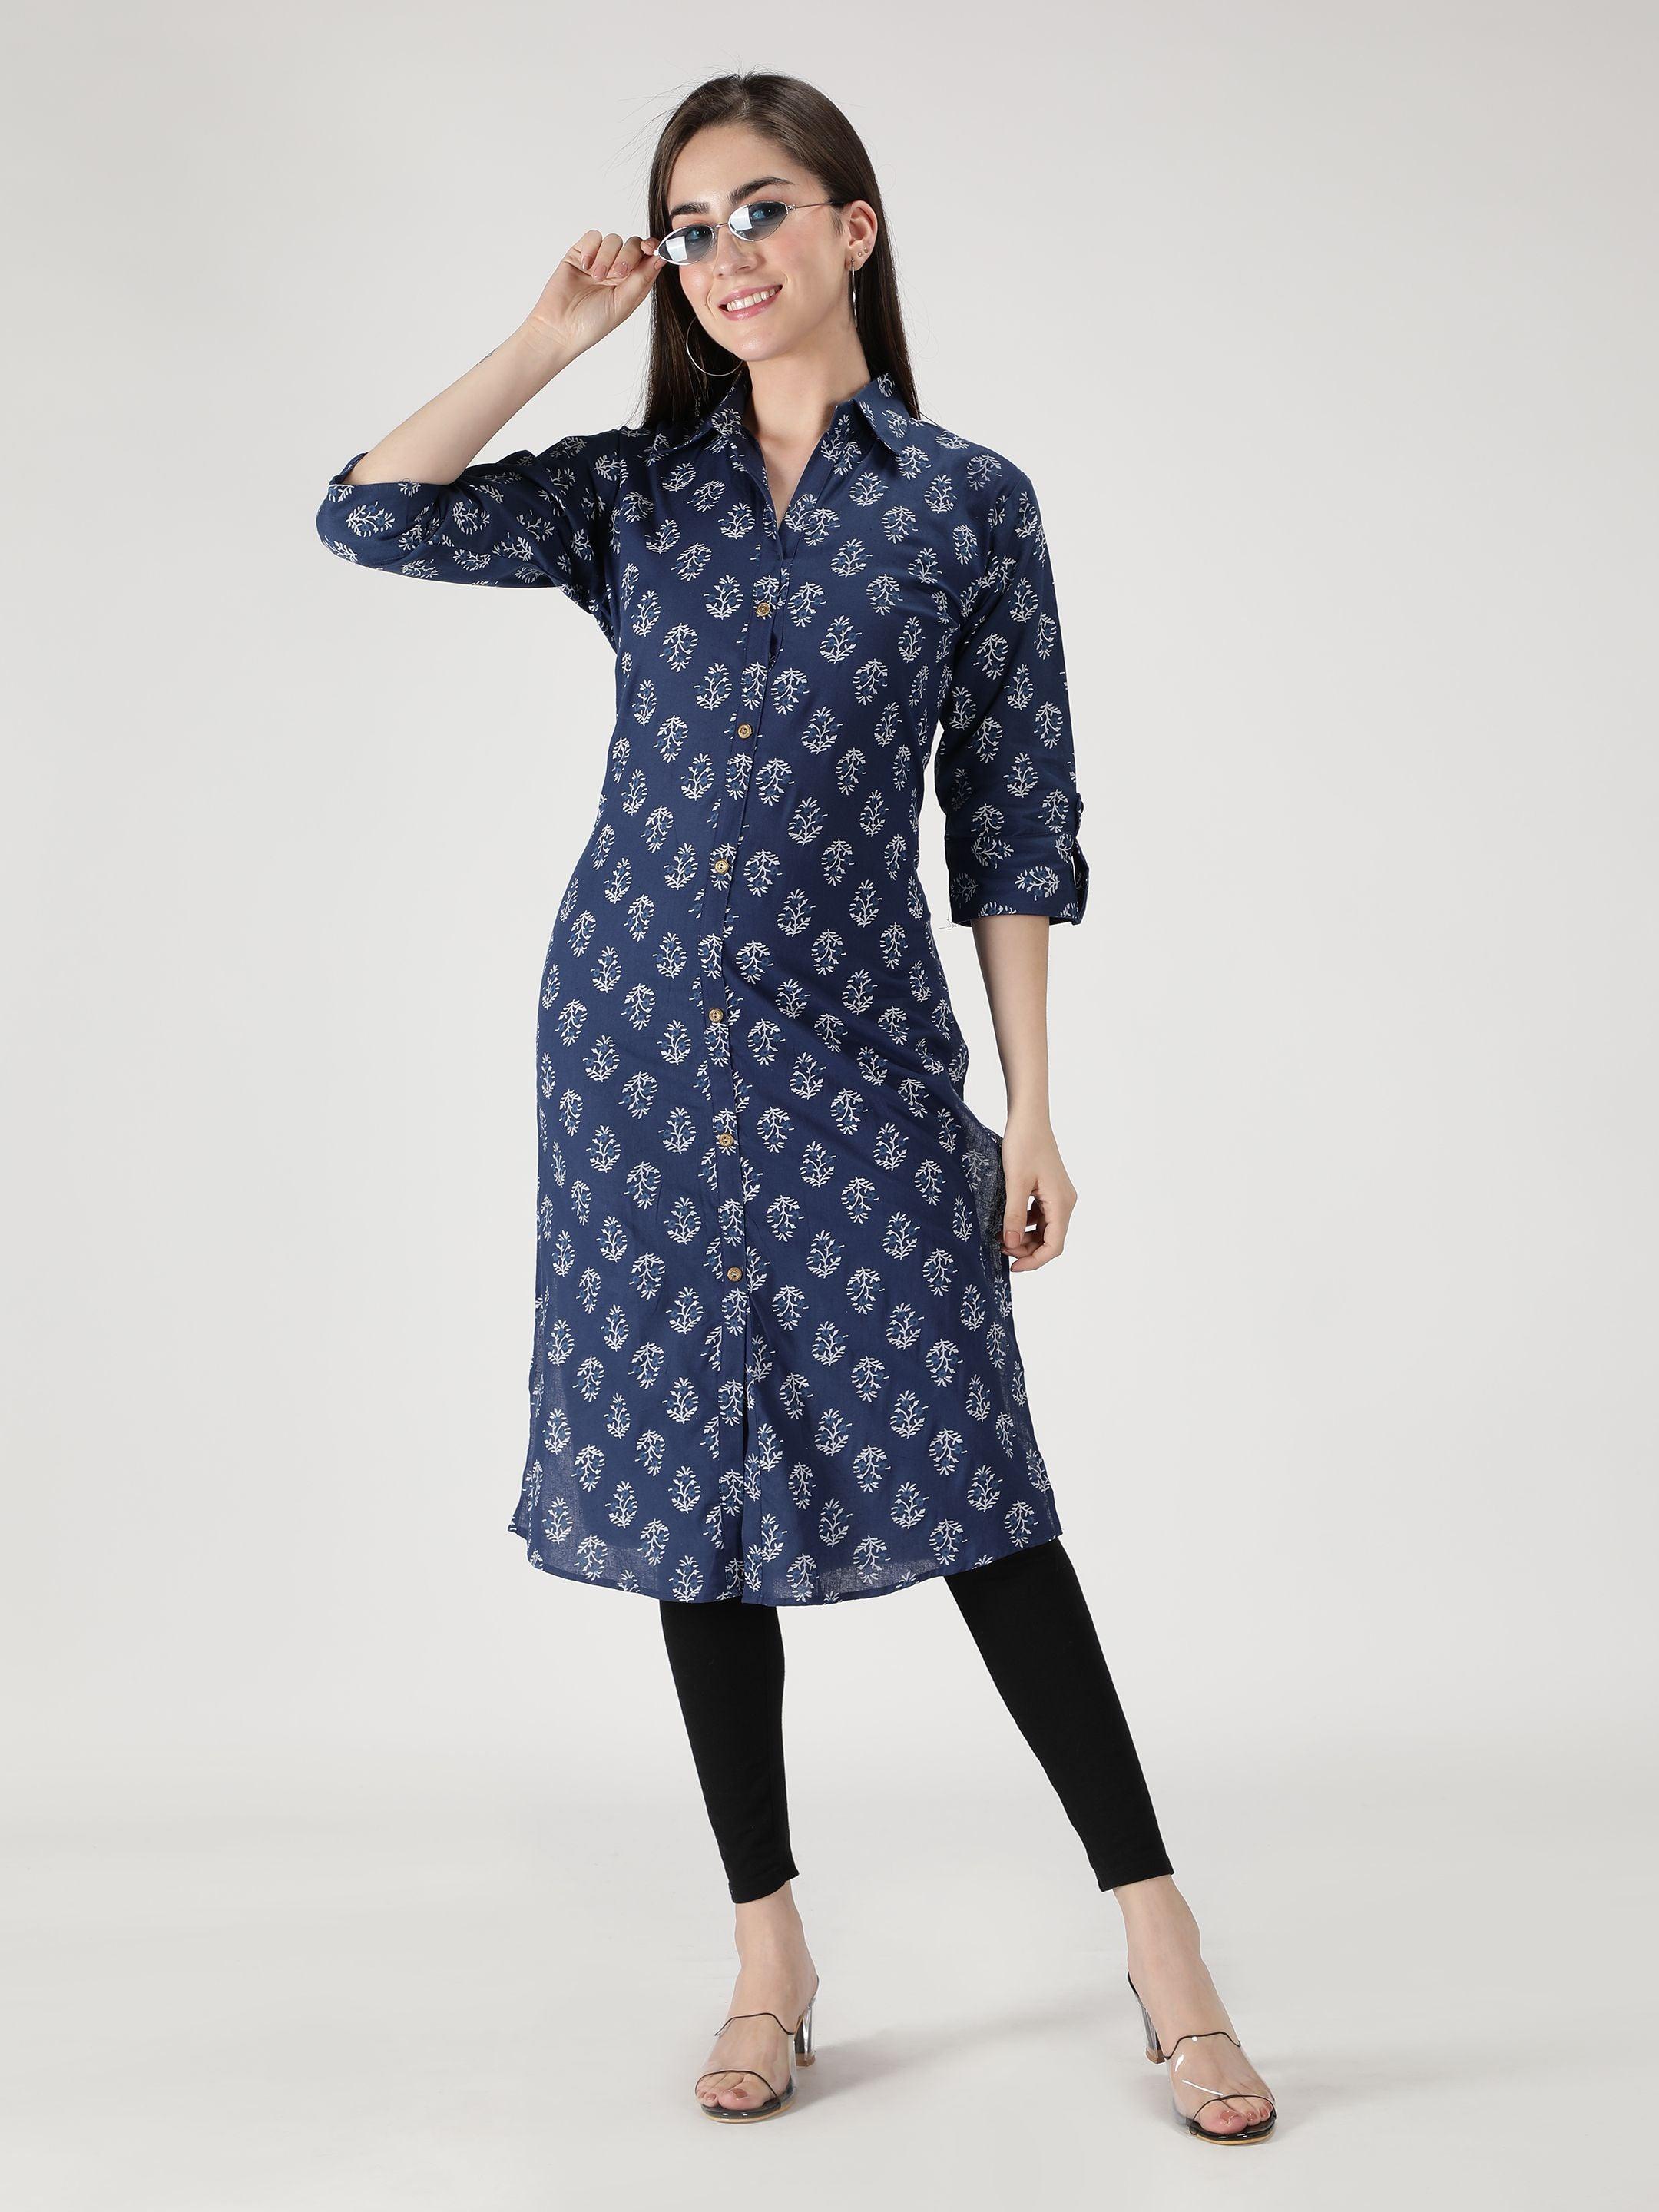 Fabclub Cotton Floral Printed Straight Women Kurti (Navy Blue) Roposo Clout